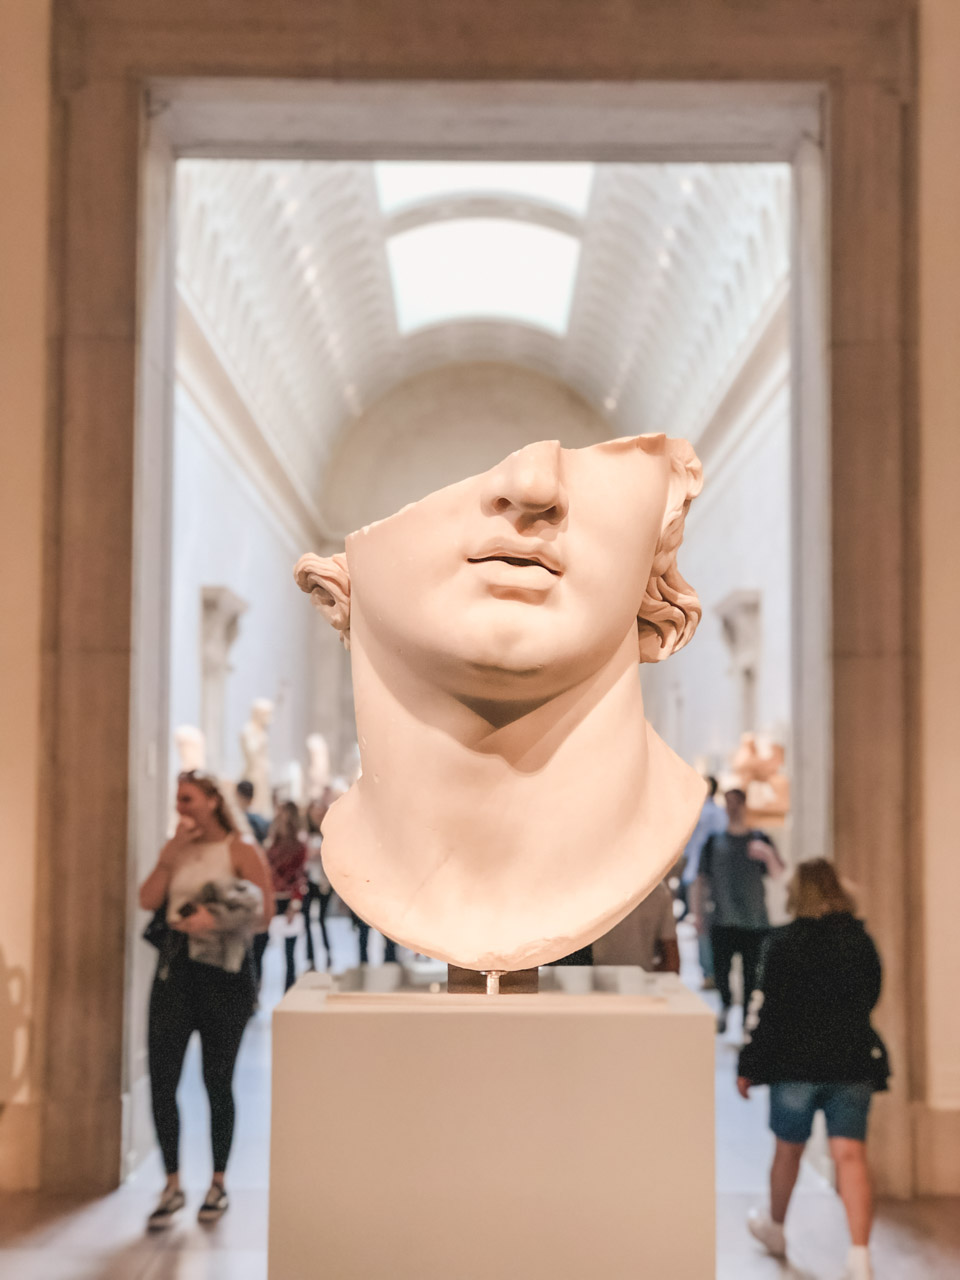 A half-face statue on display at The Met